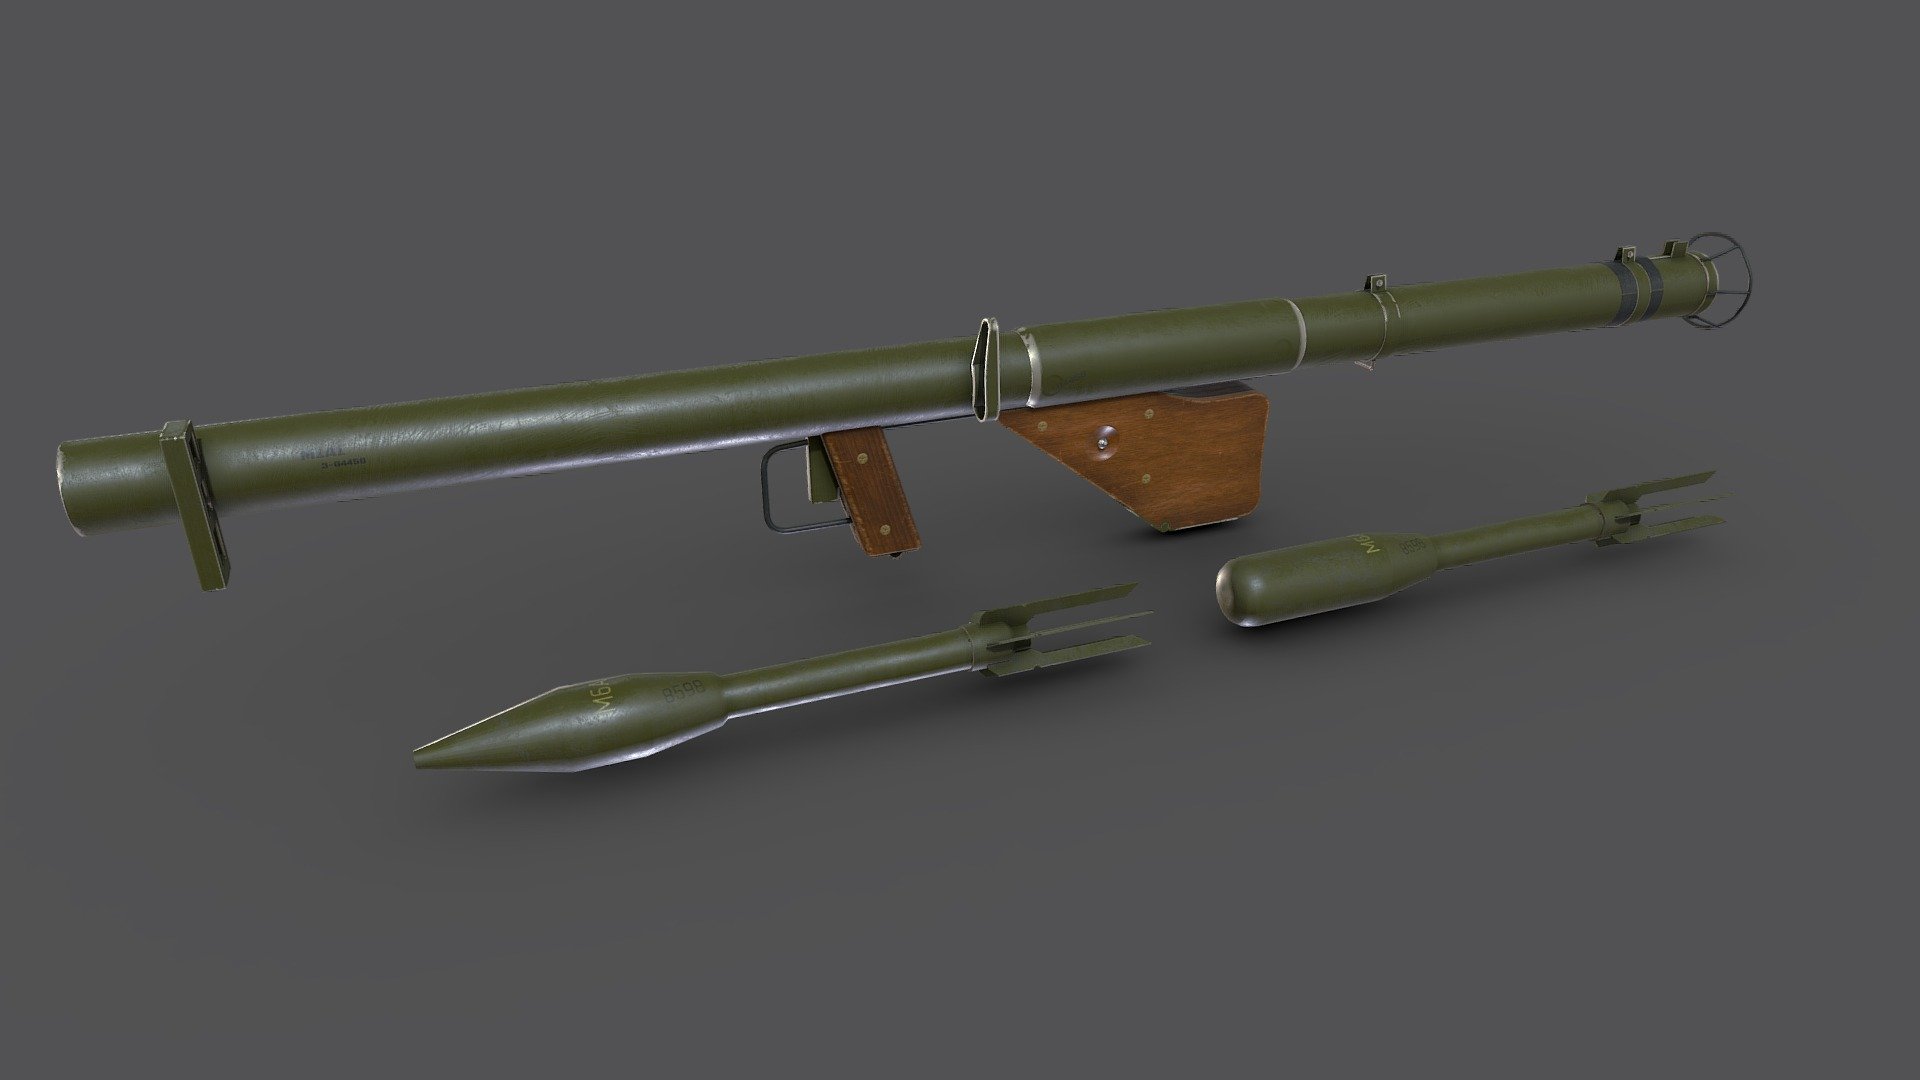 M1A1 Bazooka



Created in 3ds MAX 2018 no plugins used.

Low-poly (10,542 Tris) ready to use in games, AR/VR.

Textures are in PNG format 4096x4096(for bazooka) and 2048x2048(for rocket) PBR metalness 2 set textures.

Available formats: MAX 2018 and 2015, blender 3.6, GLB, OBJ, MTL, FBX, .tbscene.

Files unit: Centimeters.

If you need any other file format you can always request it.

All formats include materials and textures.

check the collection click here - M1A1 Bazooka Anti-tank Rocket Launcher - Buy Royalty Free 3D model by MaX3Dd 3d model